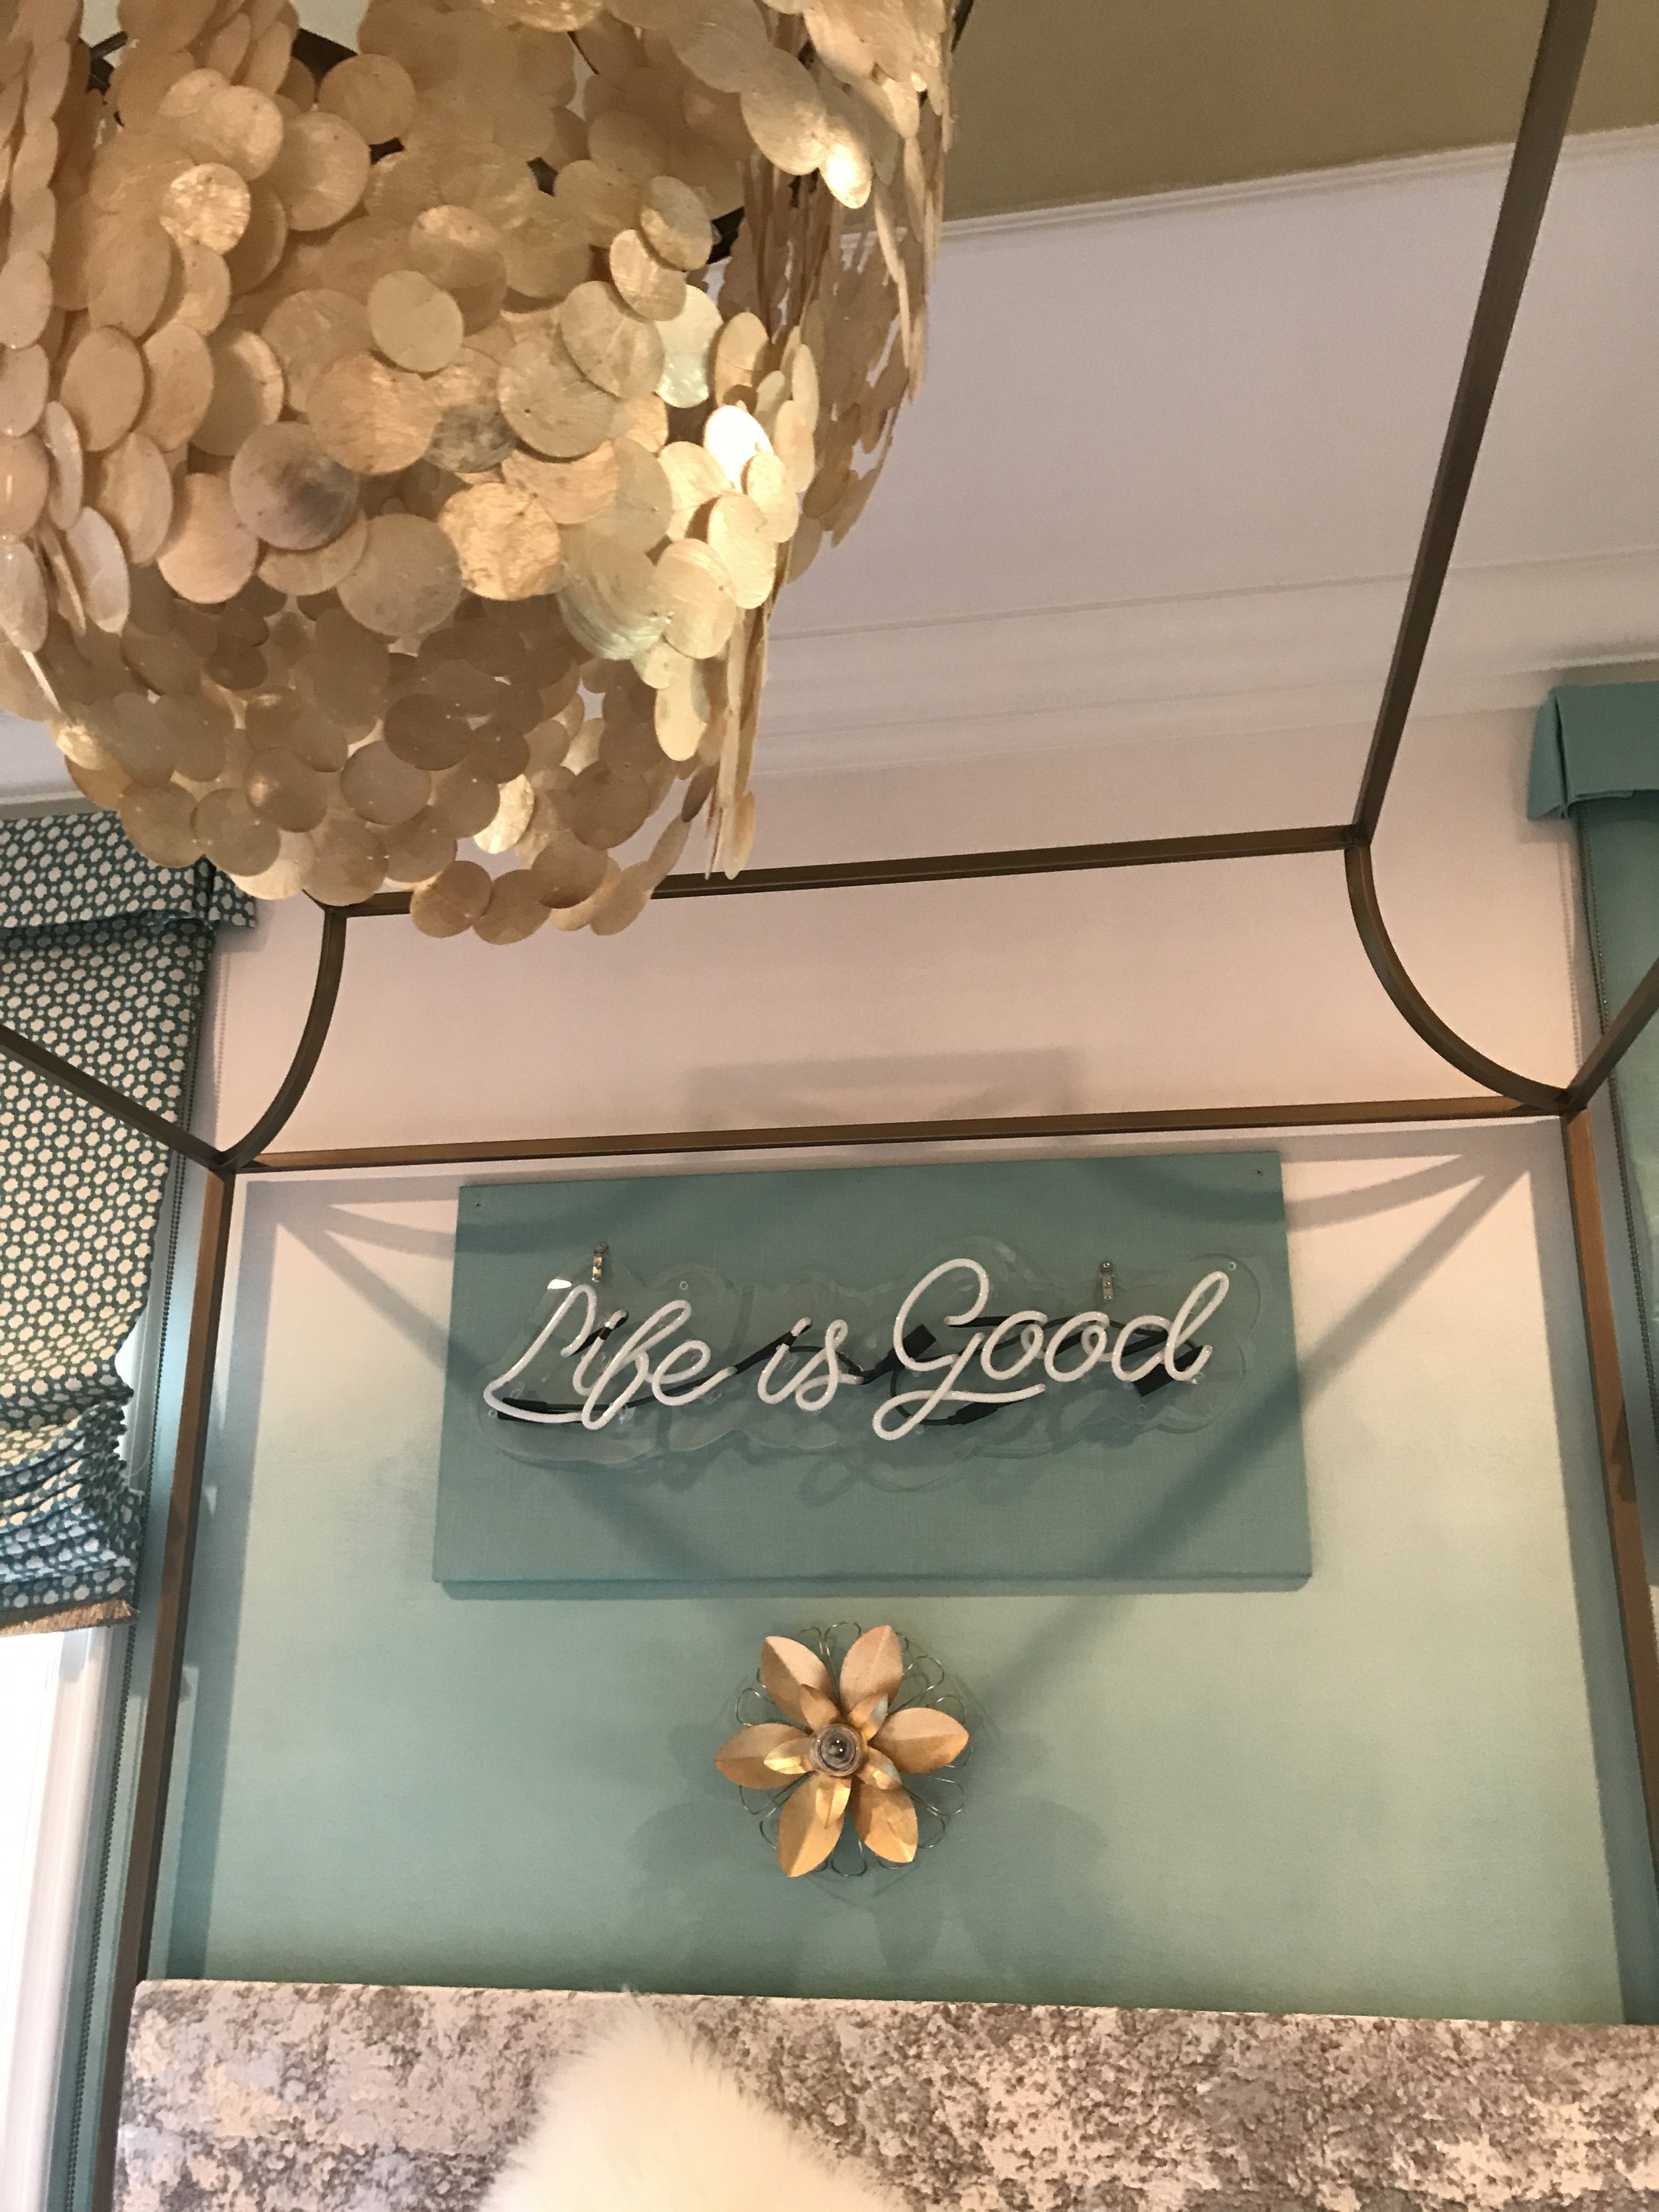  “Life is Good” is the motto of a tween girl, the daughter of a client of ours. We brought this quote to life in a custom neon sign above her bed.  